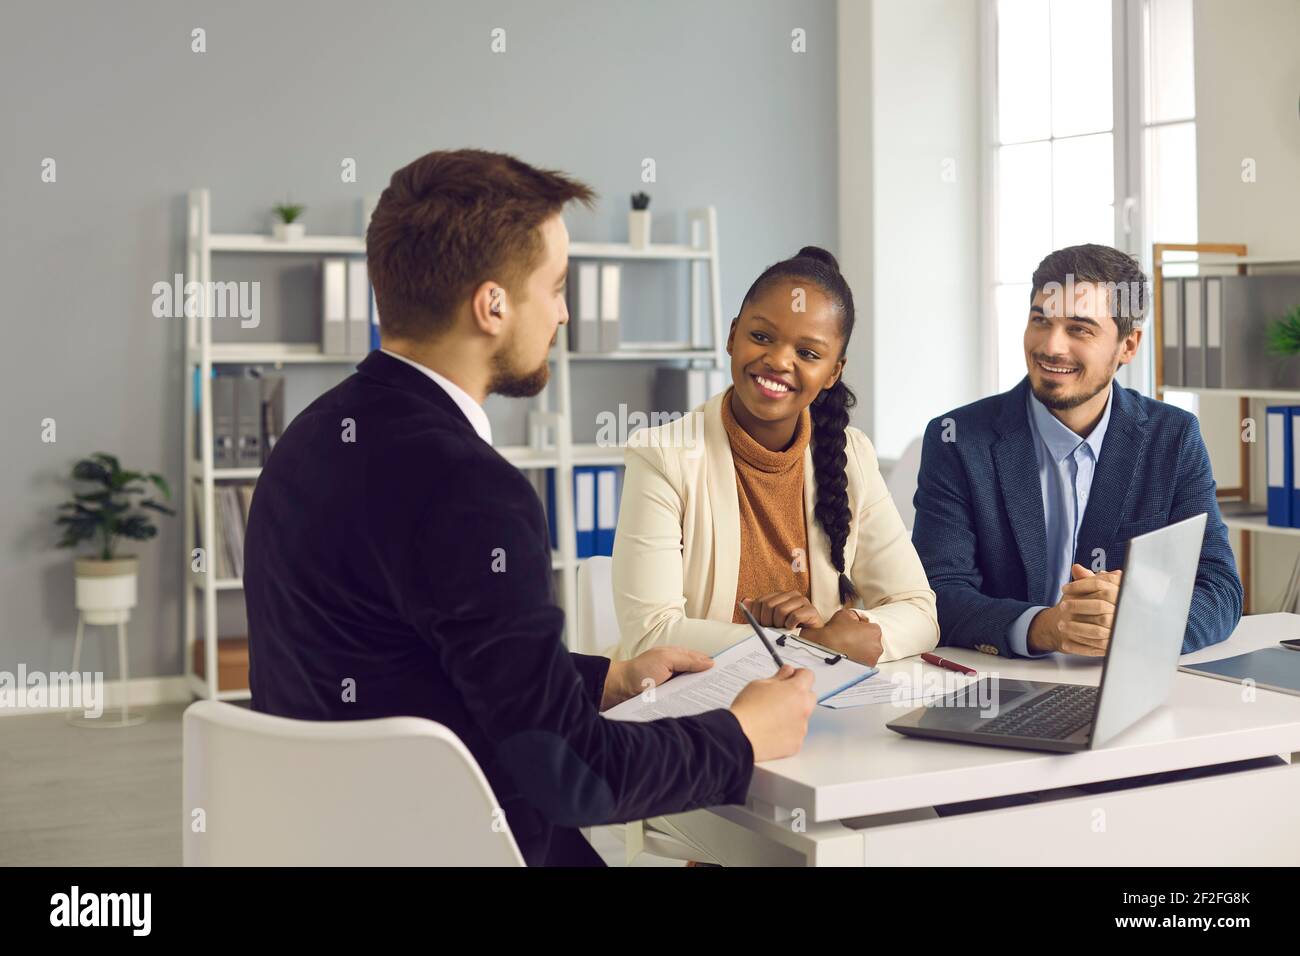 Financial manager, realtor or insurer consulting clients in modern office Stock Photo